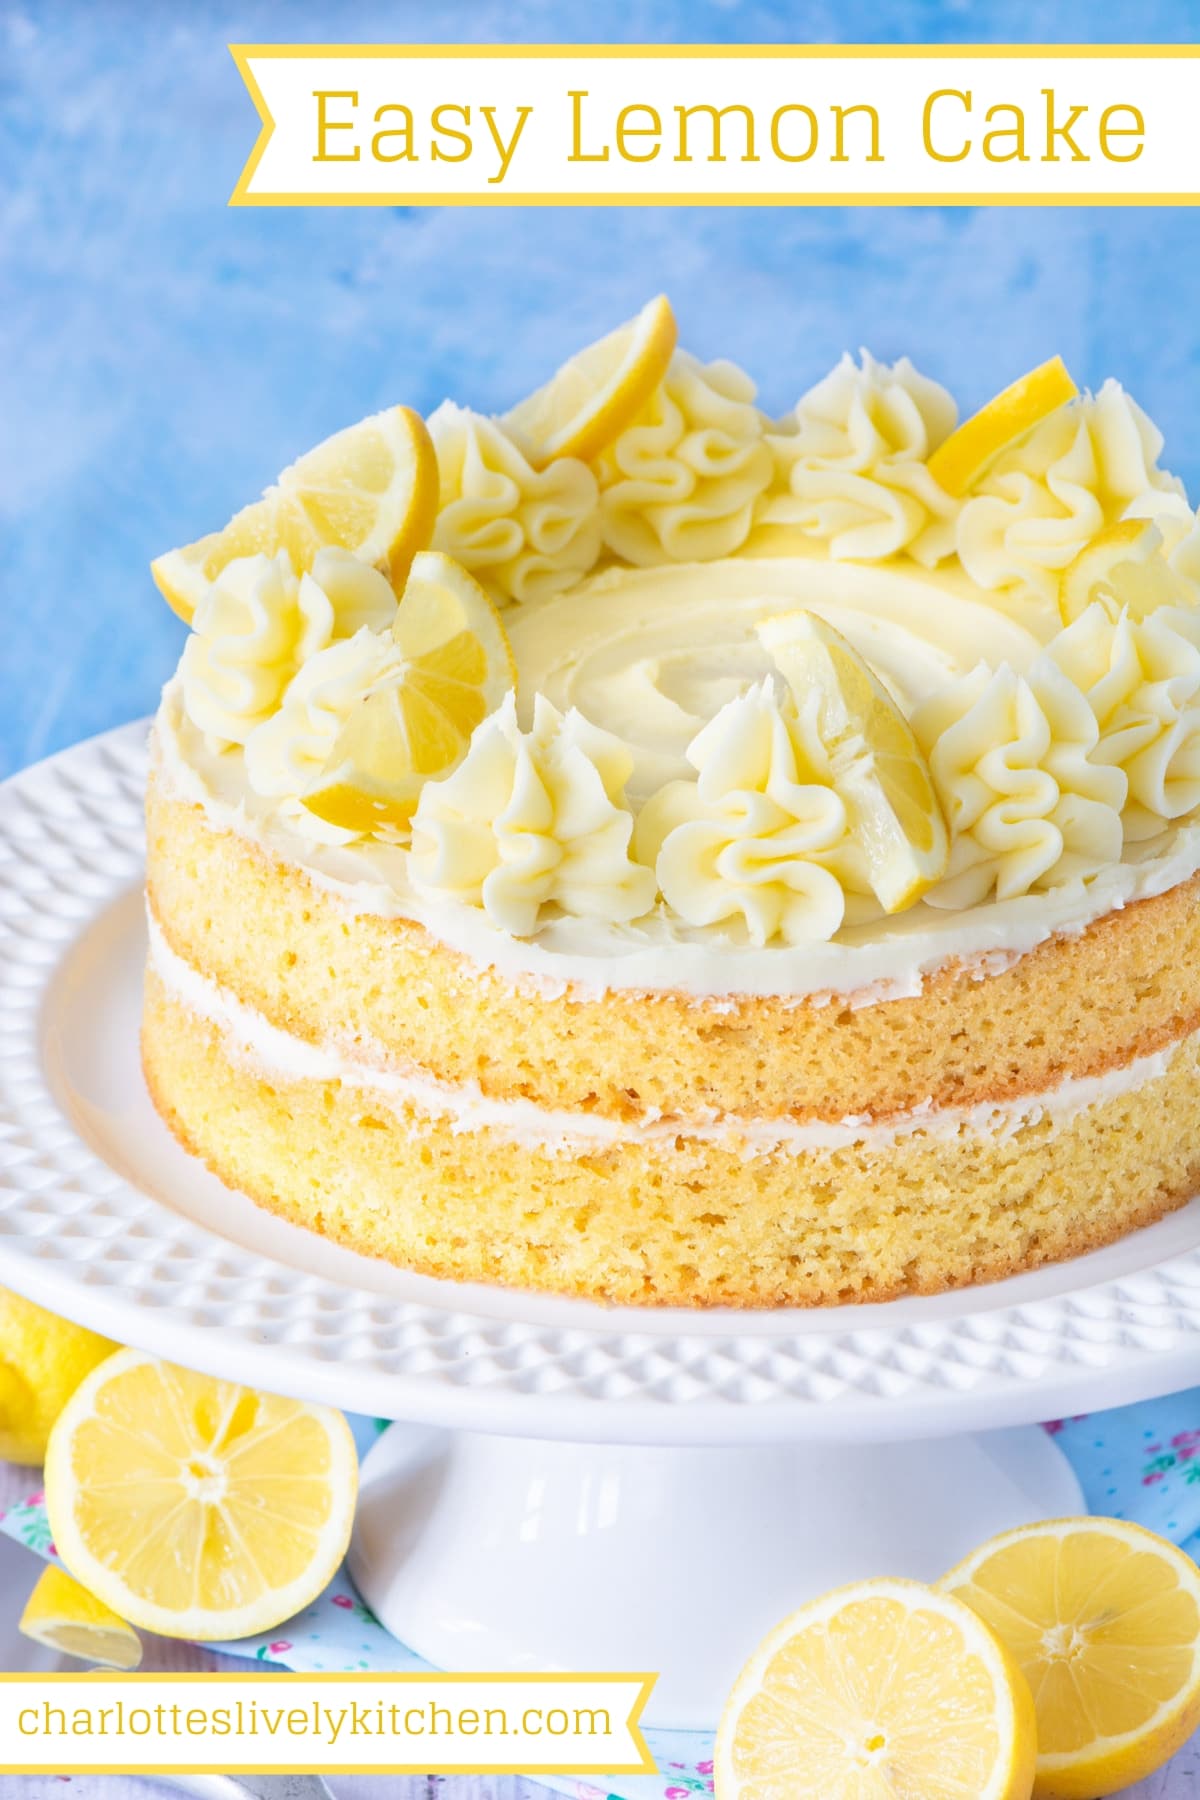 The finished lemon sponge cake. The cake is decorated with swirls is piped lemon buttercream and slices of lemon and is on a white cake stand. There is a title saying "Easy Lemon Cake" at the top of the image, making this image perfect for saving to Pinterest.